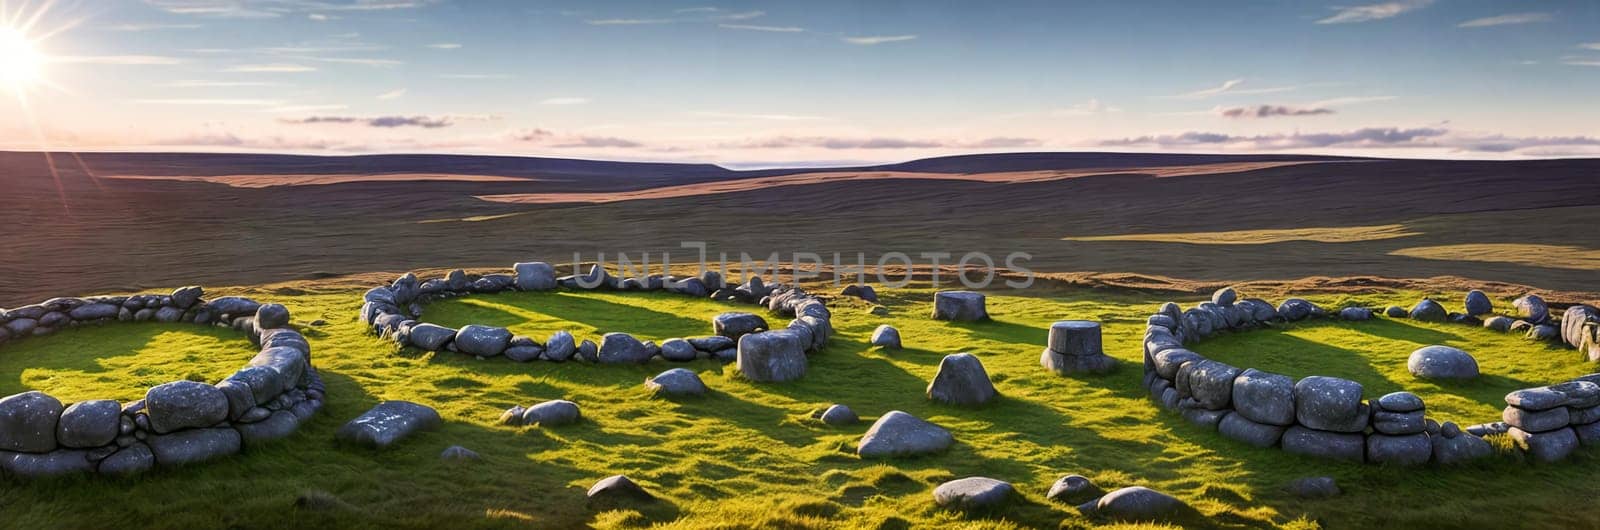 A mysterious and ancient stone circle nestled in a remote moorland by GoodOlga